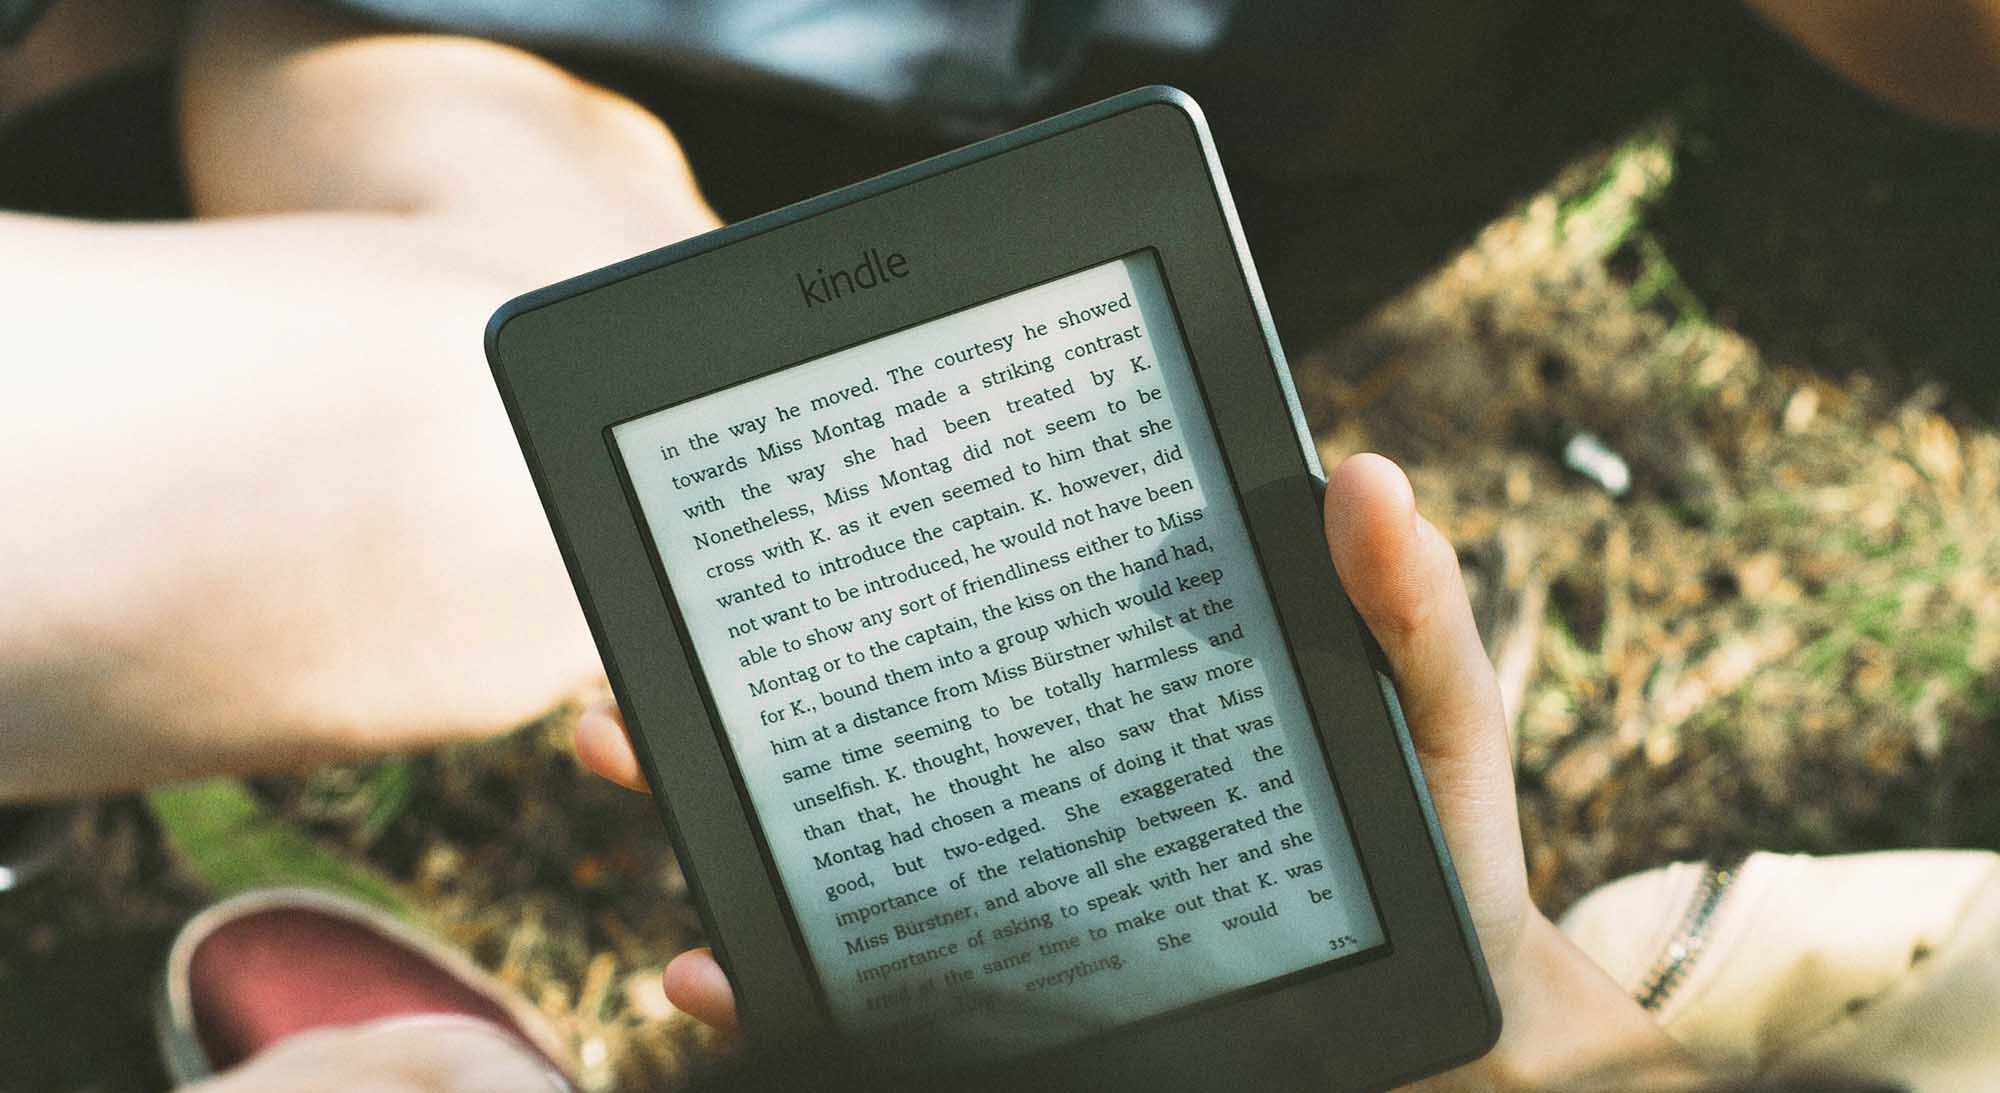 Person reading on an e-reader